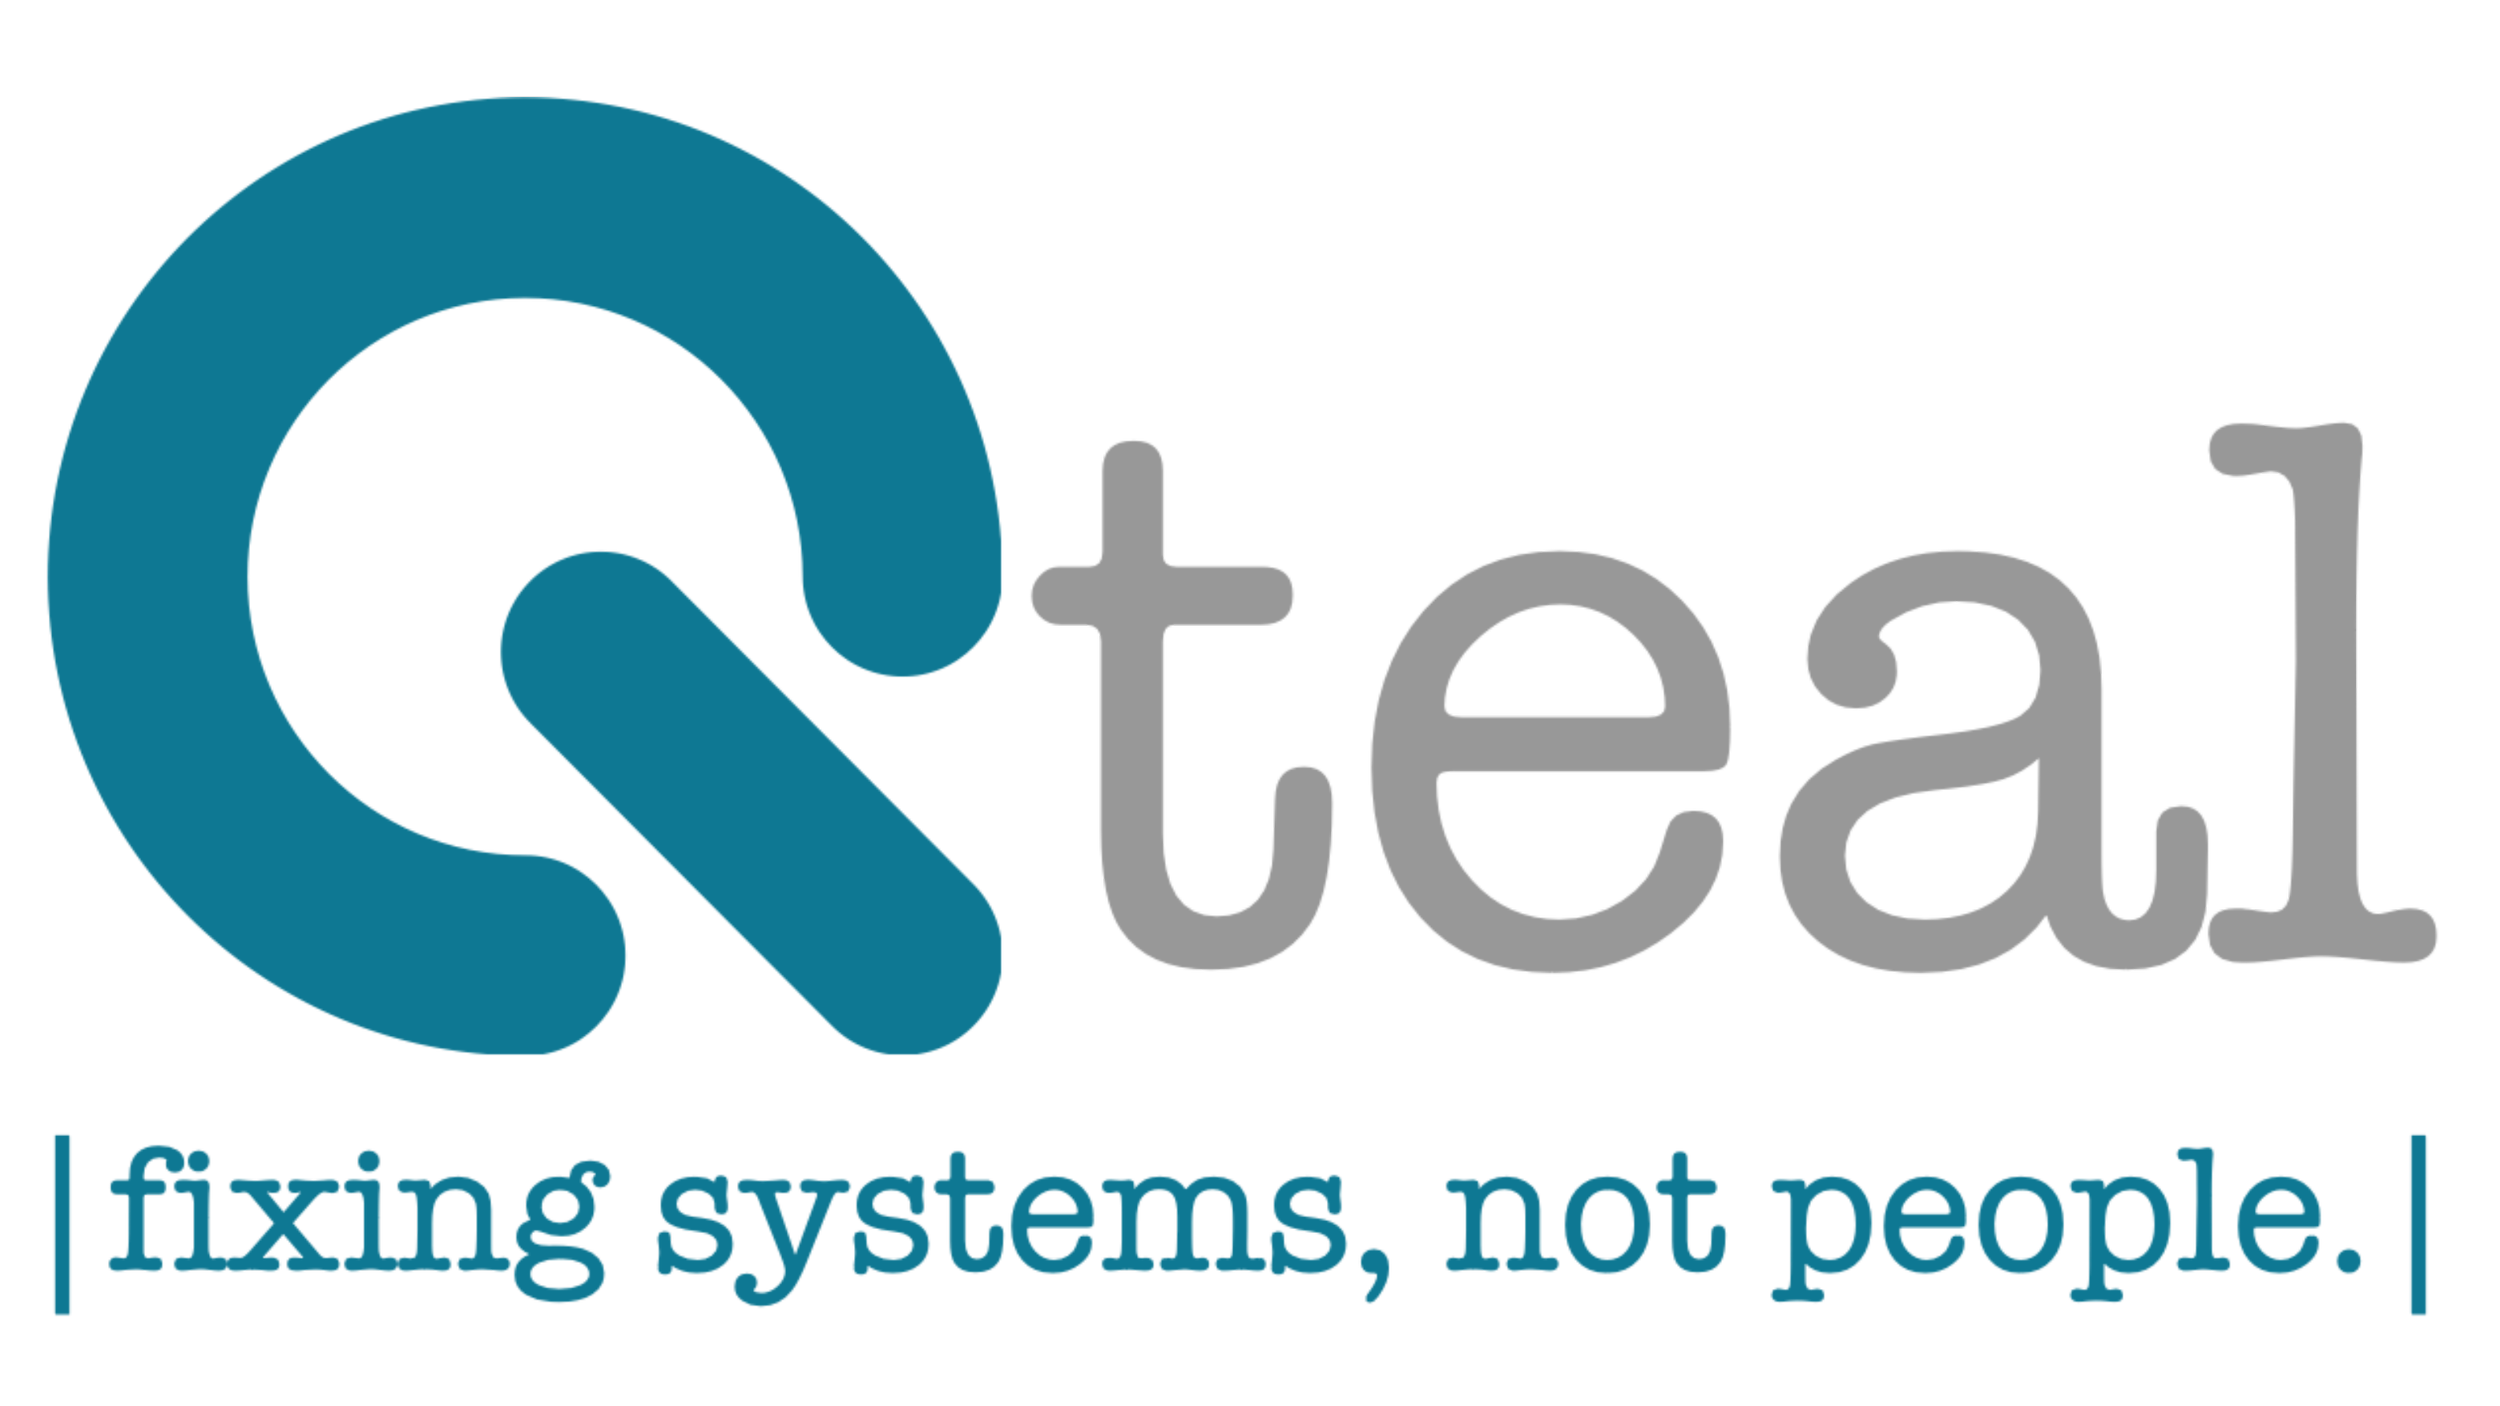 Qteal | fixing systems, not people.